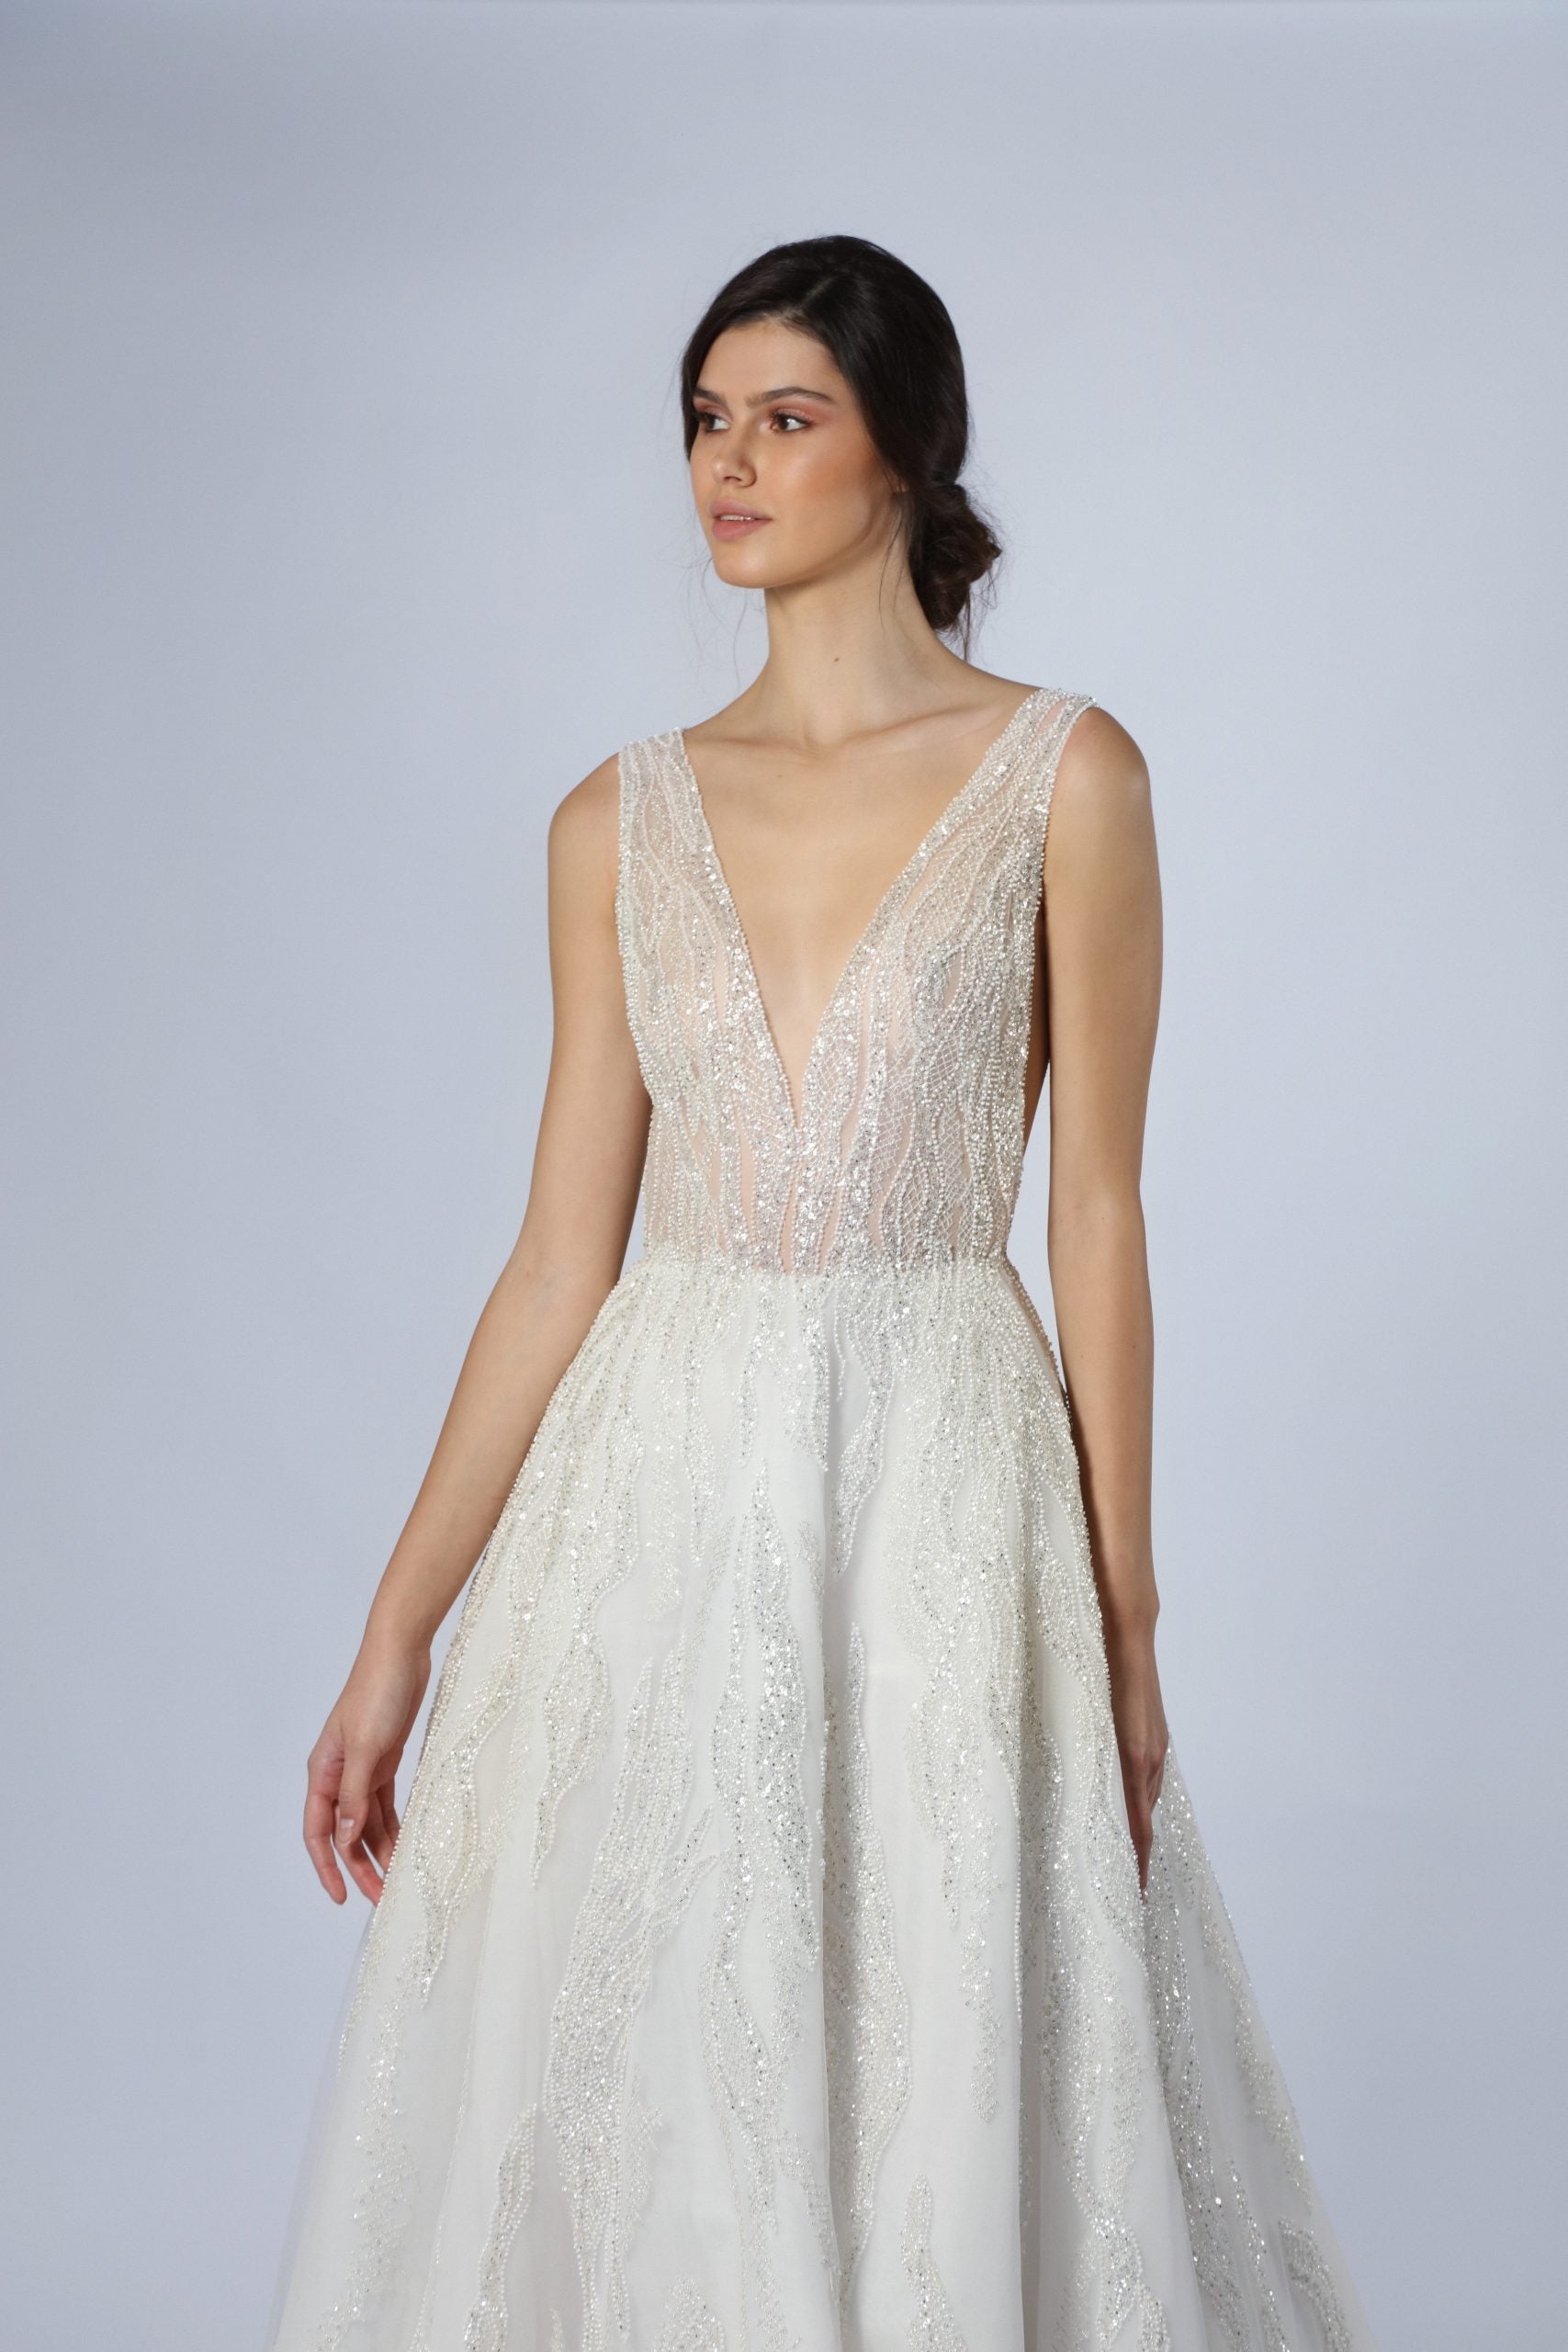 Embellished V-Neck A-Line Gown by Tony Ward - Image 2